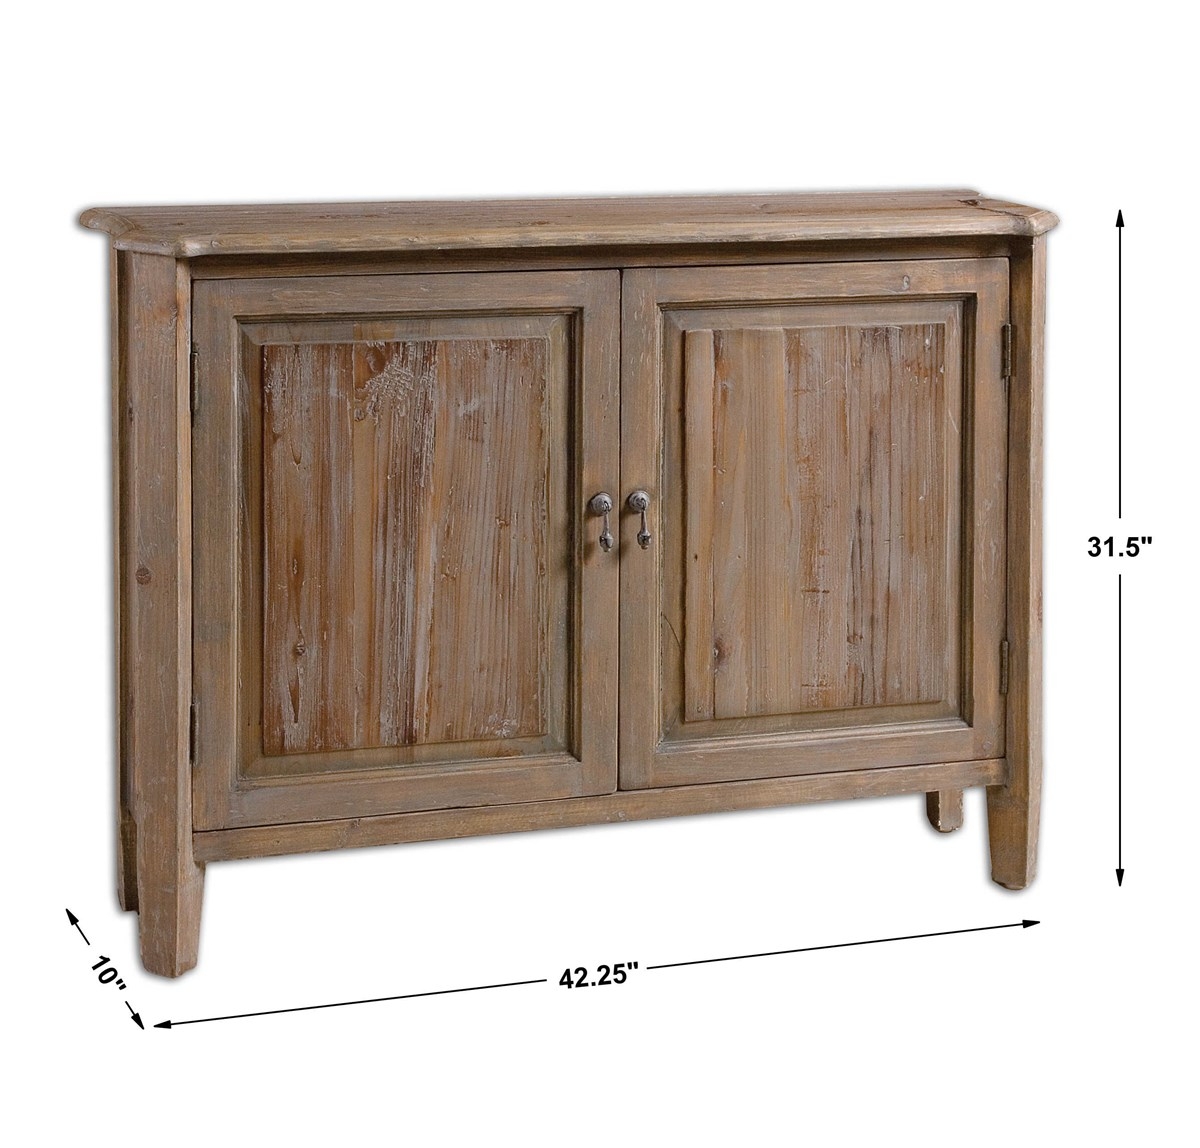 Altair Reclaimed Wood Console Cabinet - Image 2